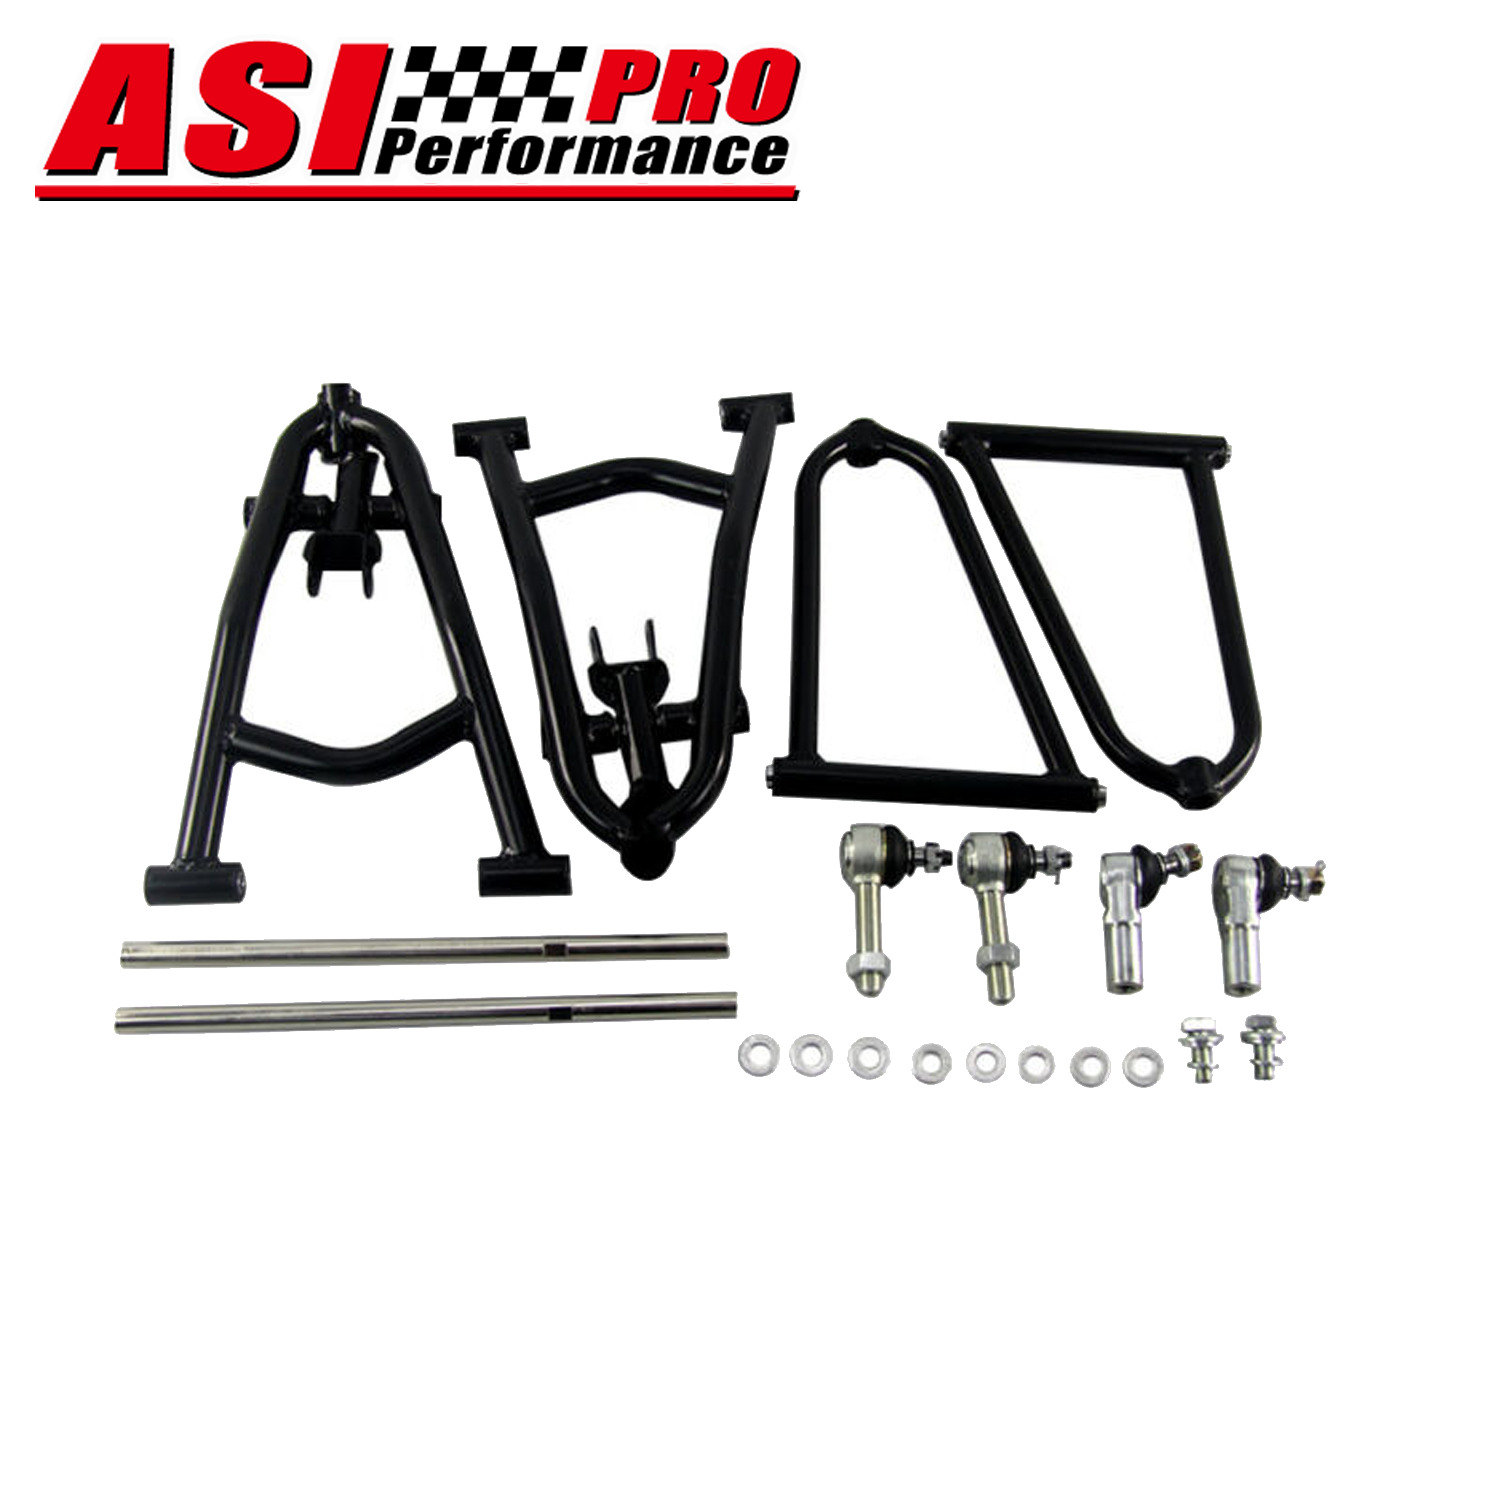 ASI Front Sport Extended Adjustable A-Arms +2''Wide For Yamaha Raptor 700 700R